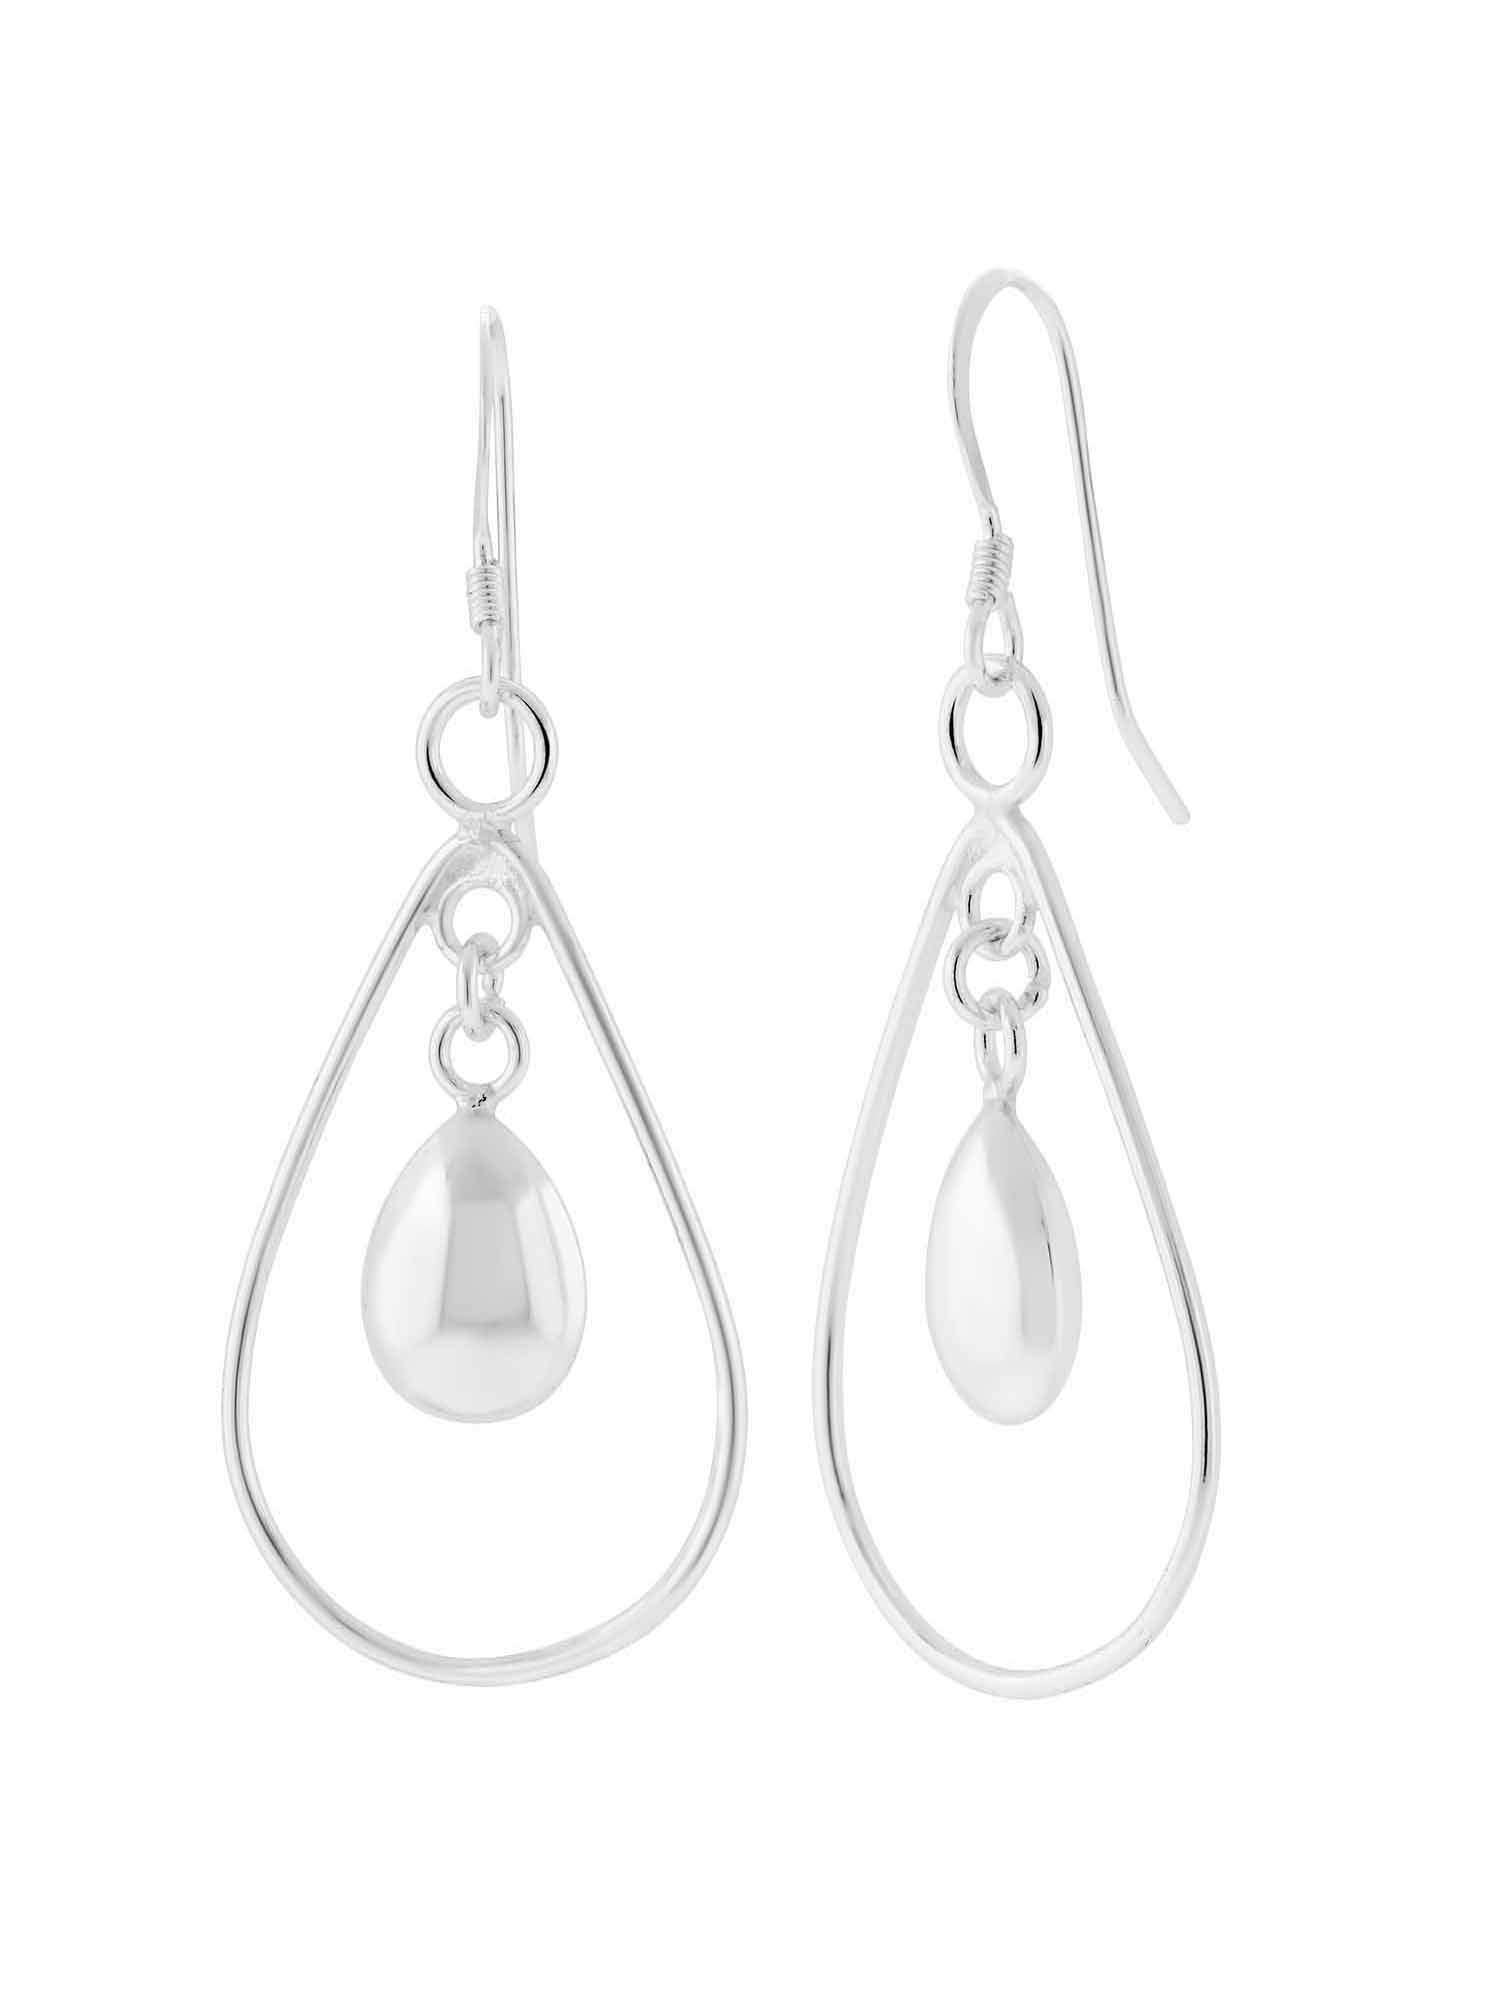 Sterling Silver Pear Shaped Puff Drop Earrings - image 1 of 4